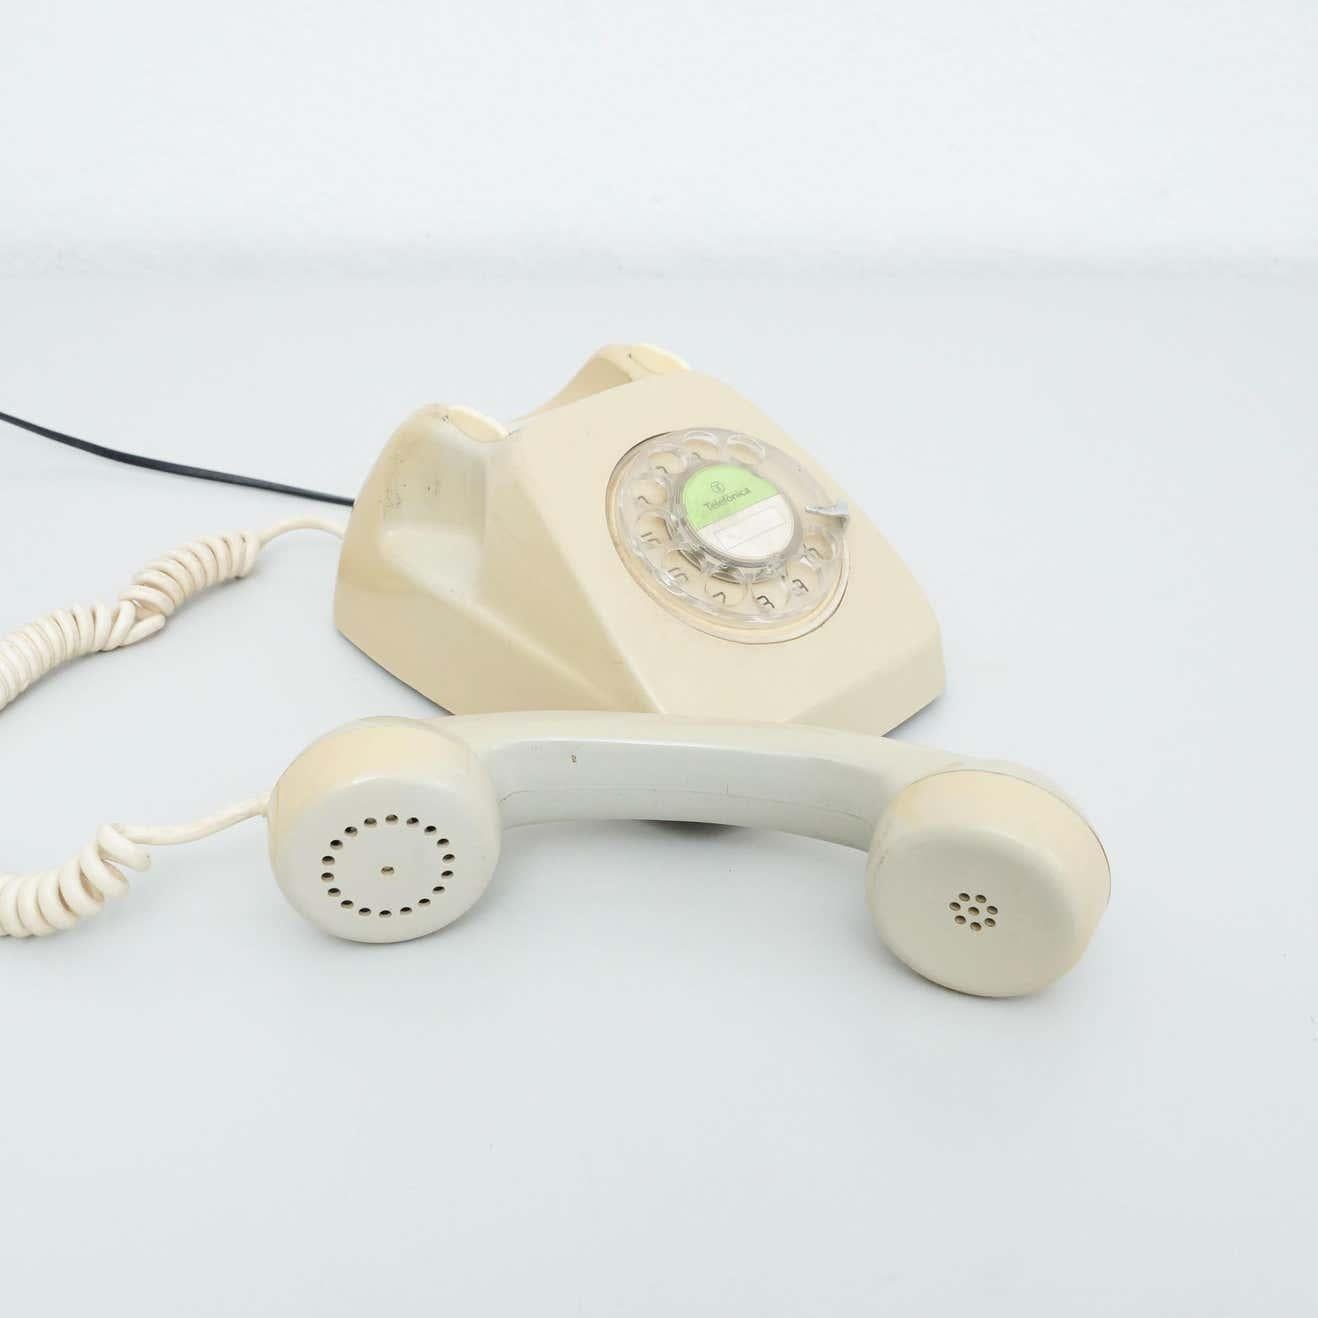 Plastic Vintage Spanish Analog Telephone by Telefonica, circa 1980 For Sale